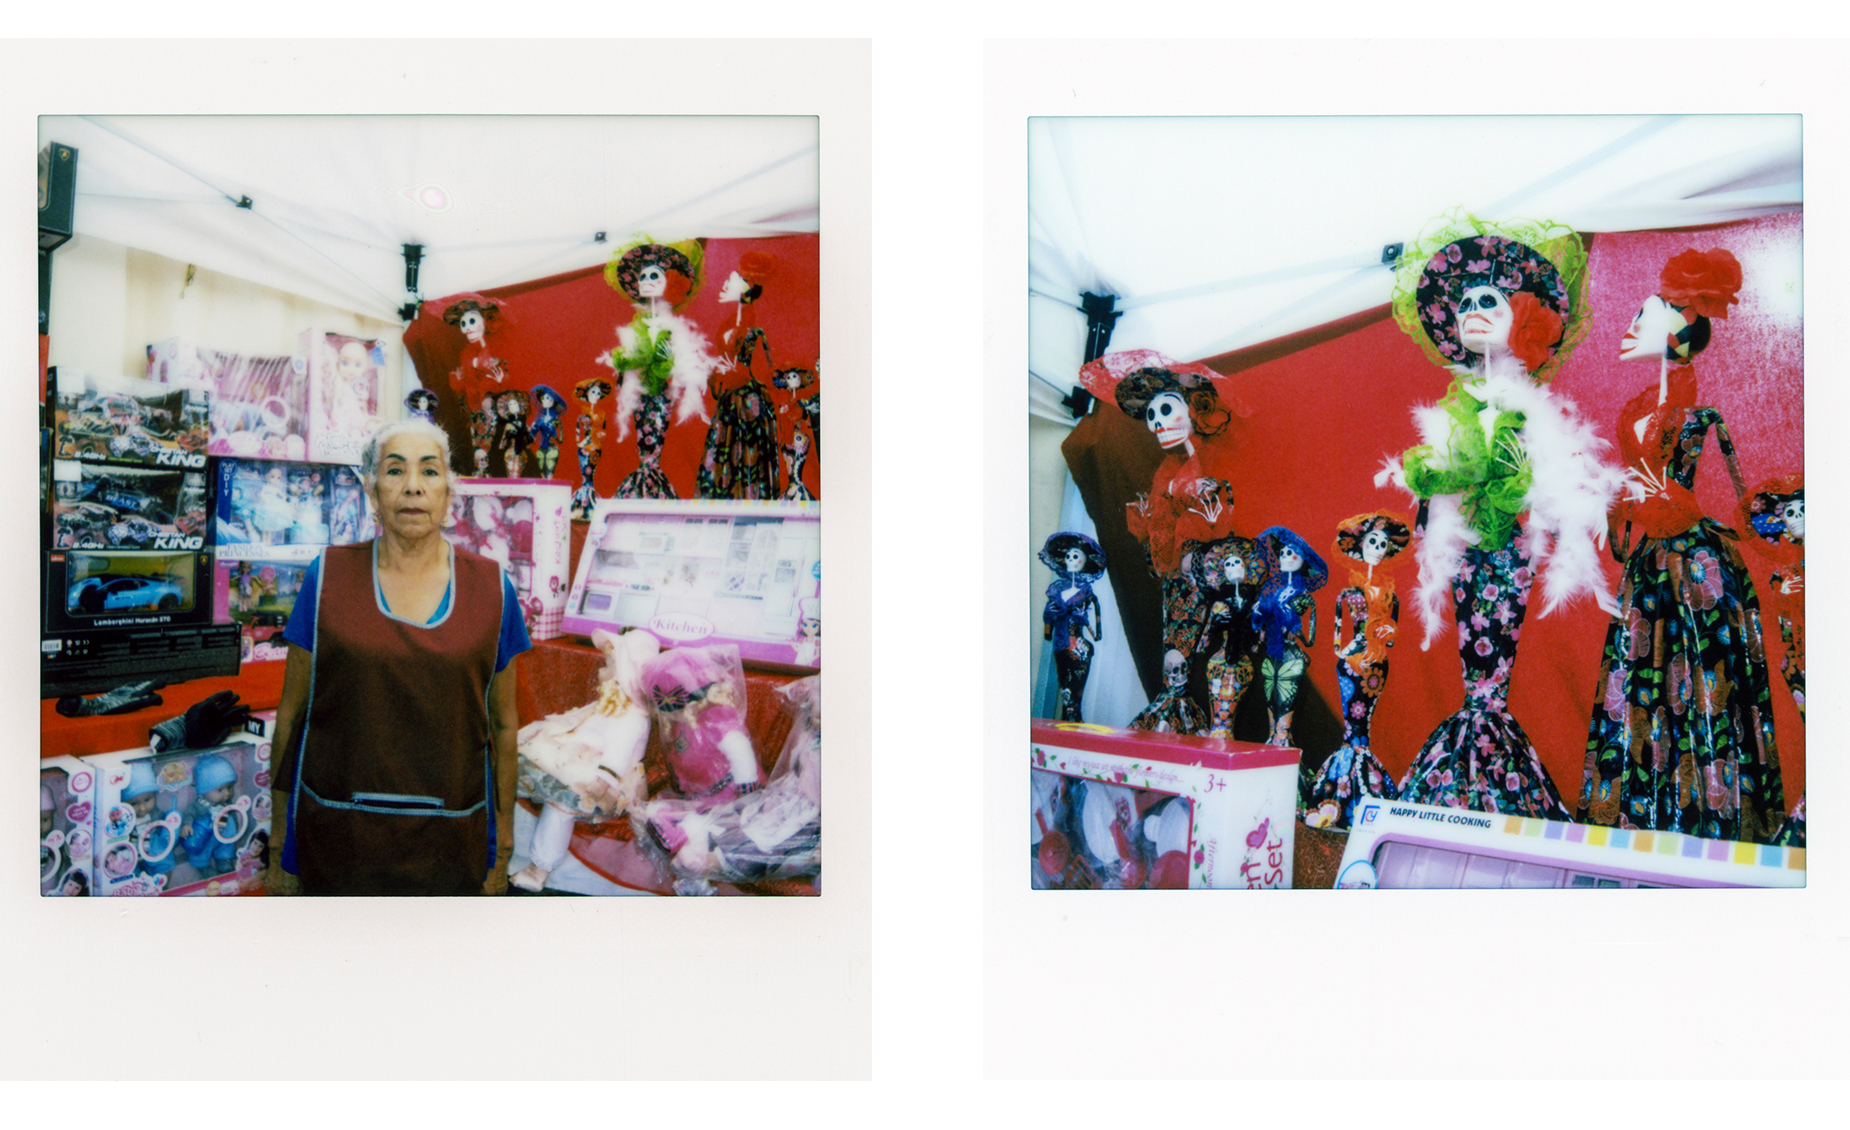 Two photos: on the left, a person stands amidst varied wares in a market stall. On the right, several Día de los Muertos statues on display in a market stall.